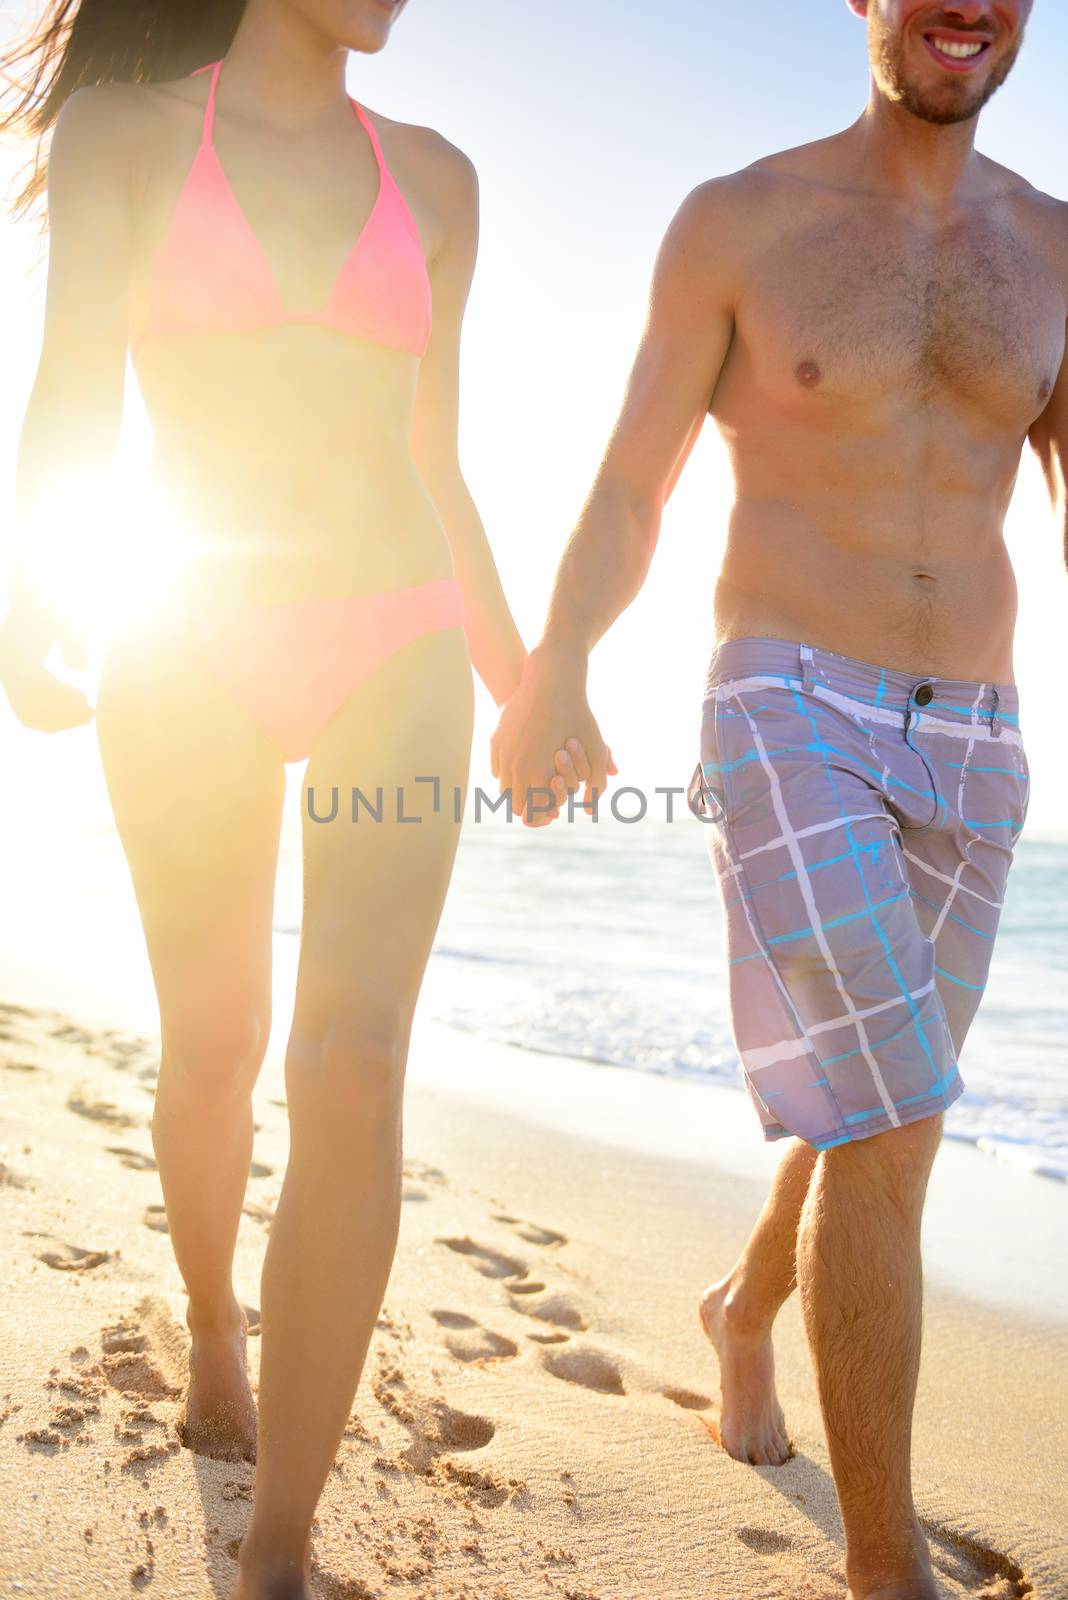 Young couple walking in beach sunset happy holding hands man smiling on joyful honeymoon vacation Hawaii summer travel. Body close up.